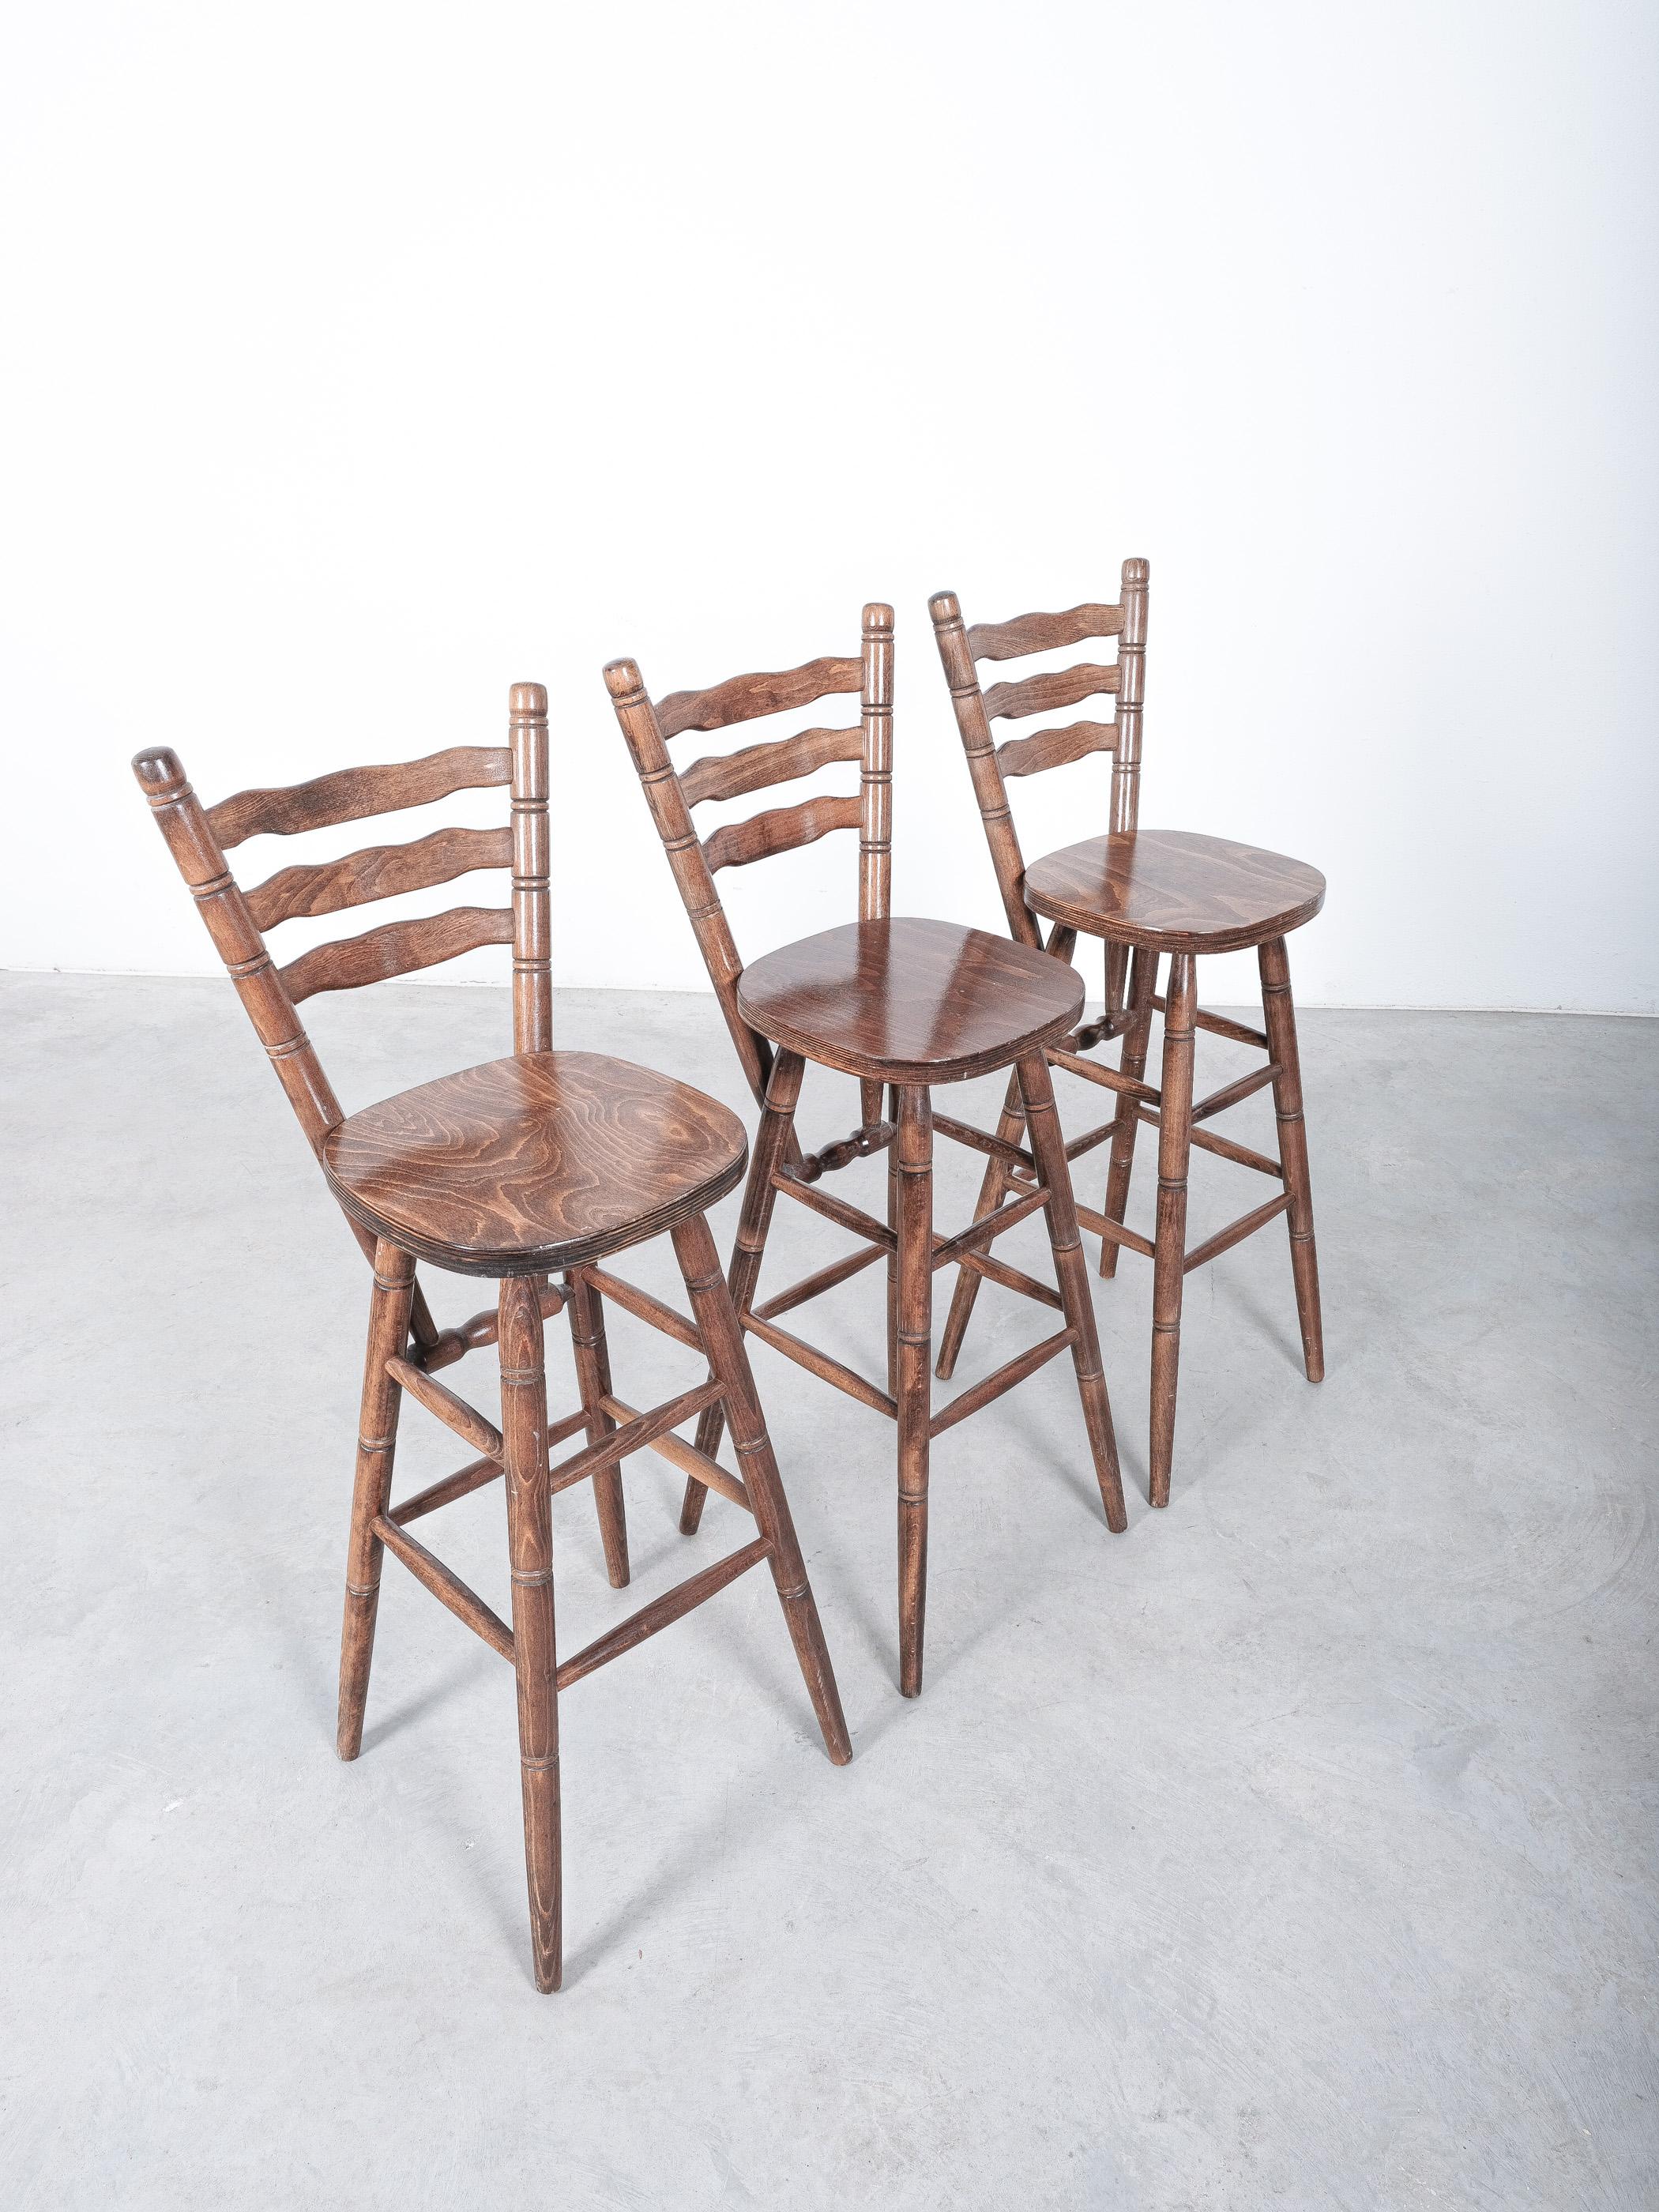 Italian Rustic Bar Stools Midcentury from Birch Wood, Germany, 1970 For Sale